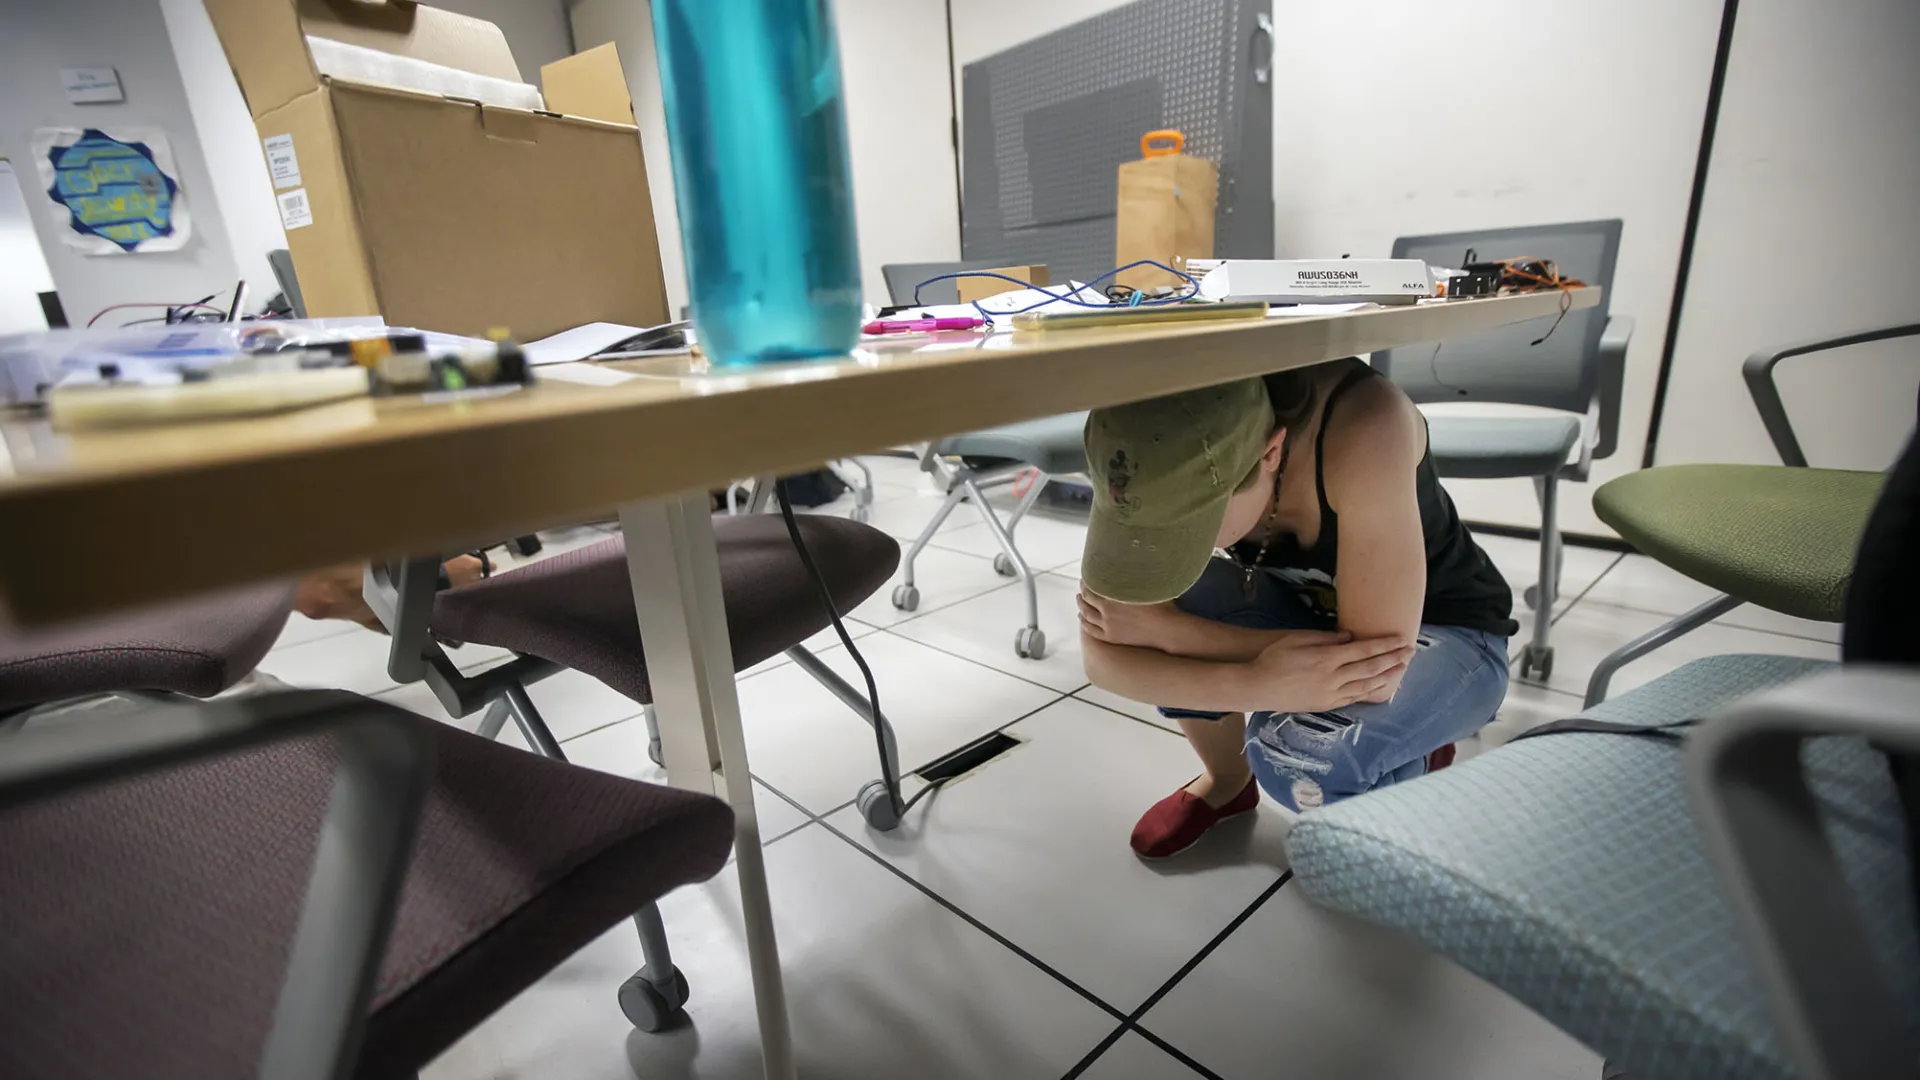 A CSUSB student in a previous Great ShakeOut earthquake drill.